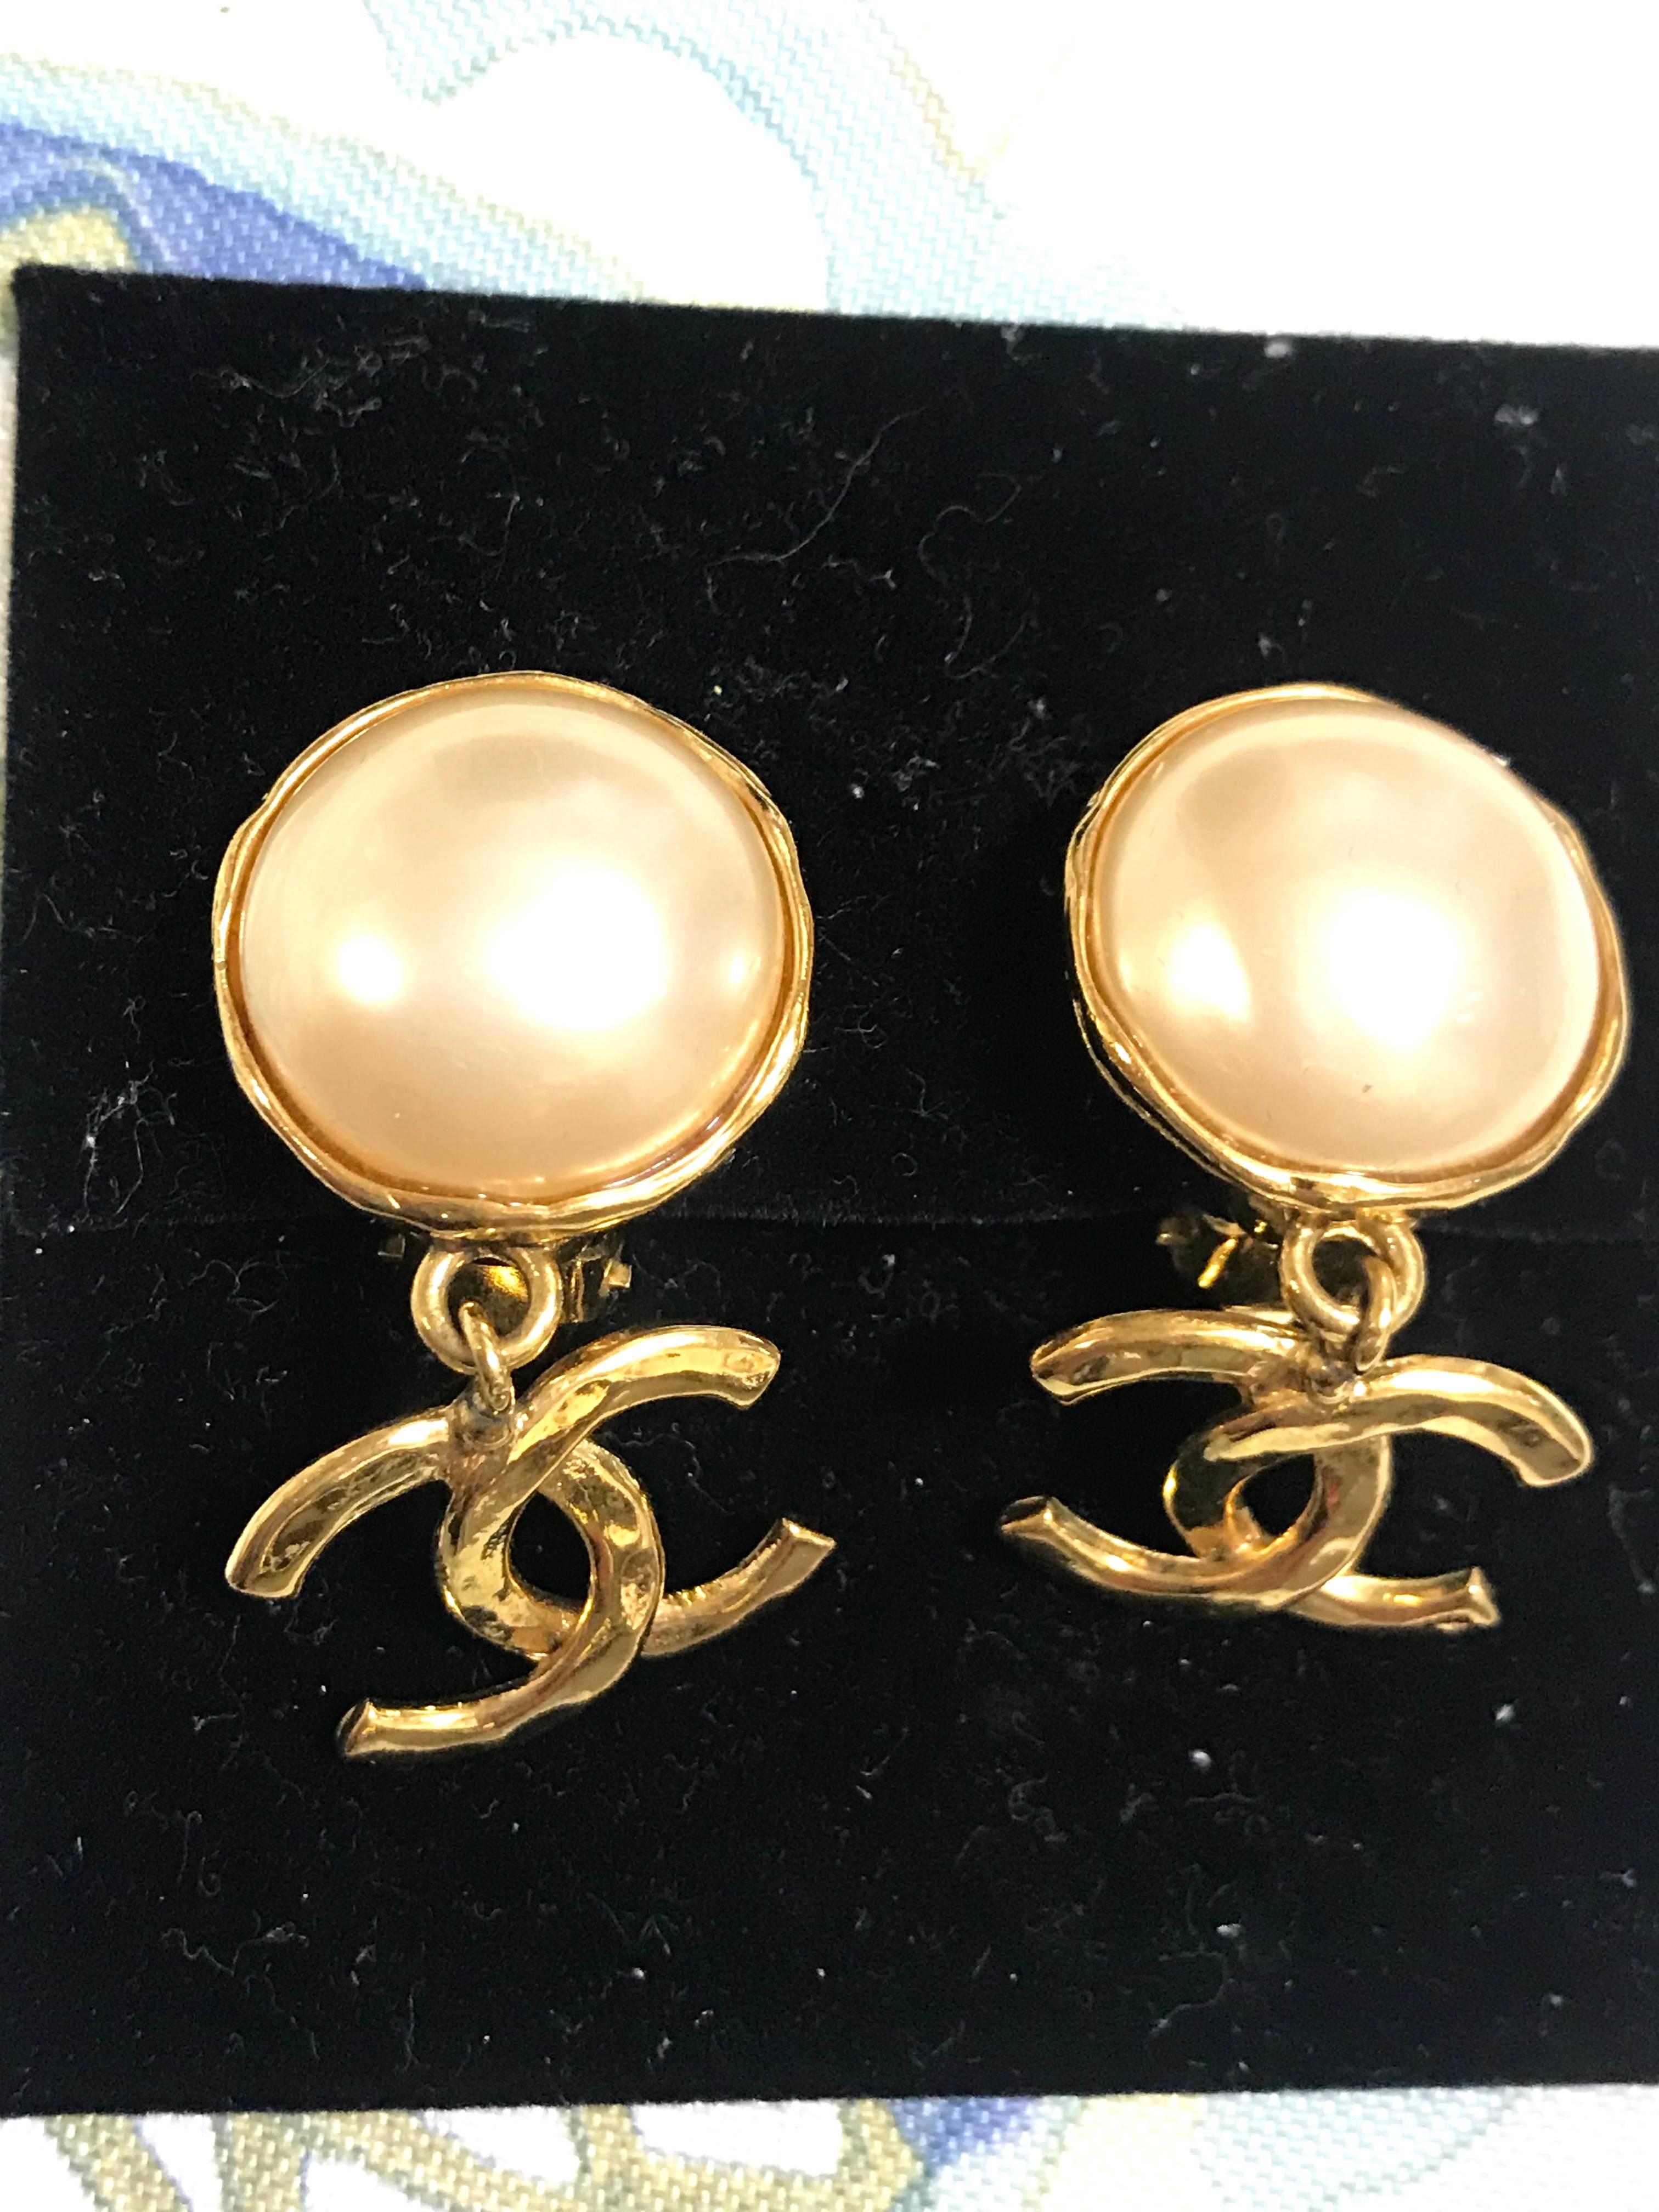 Vintage CHANEL classic round white faux pearl and golden CC dangling earrings. 1